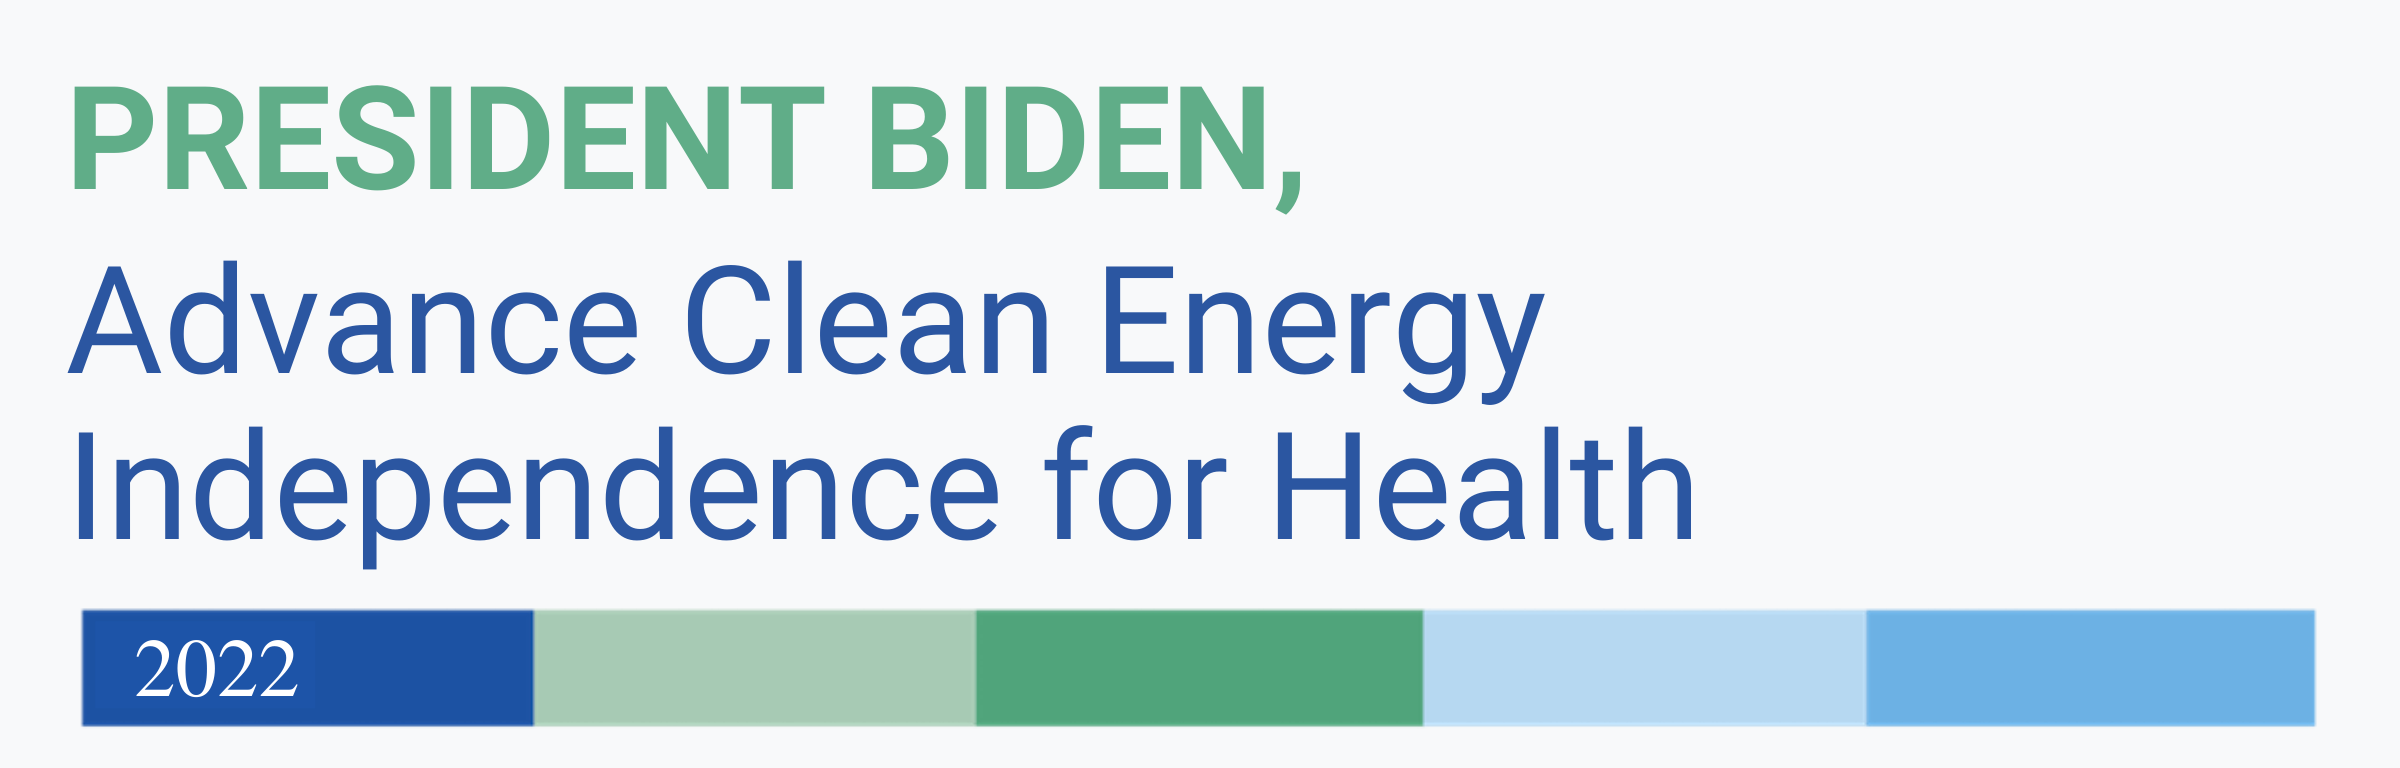 America's Health Community Calls on the Biden Administration to Limit Fossil Fuel Expansion